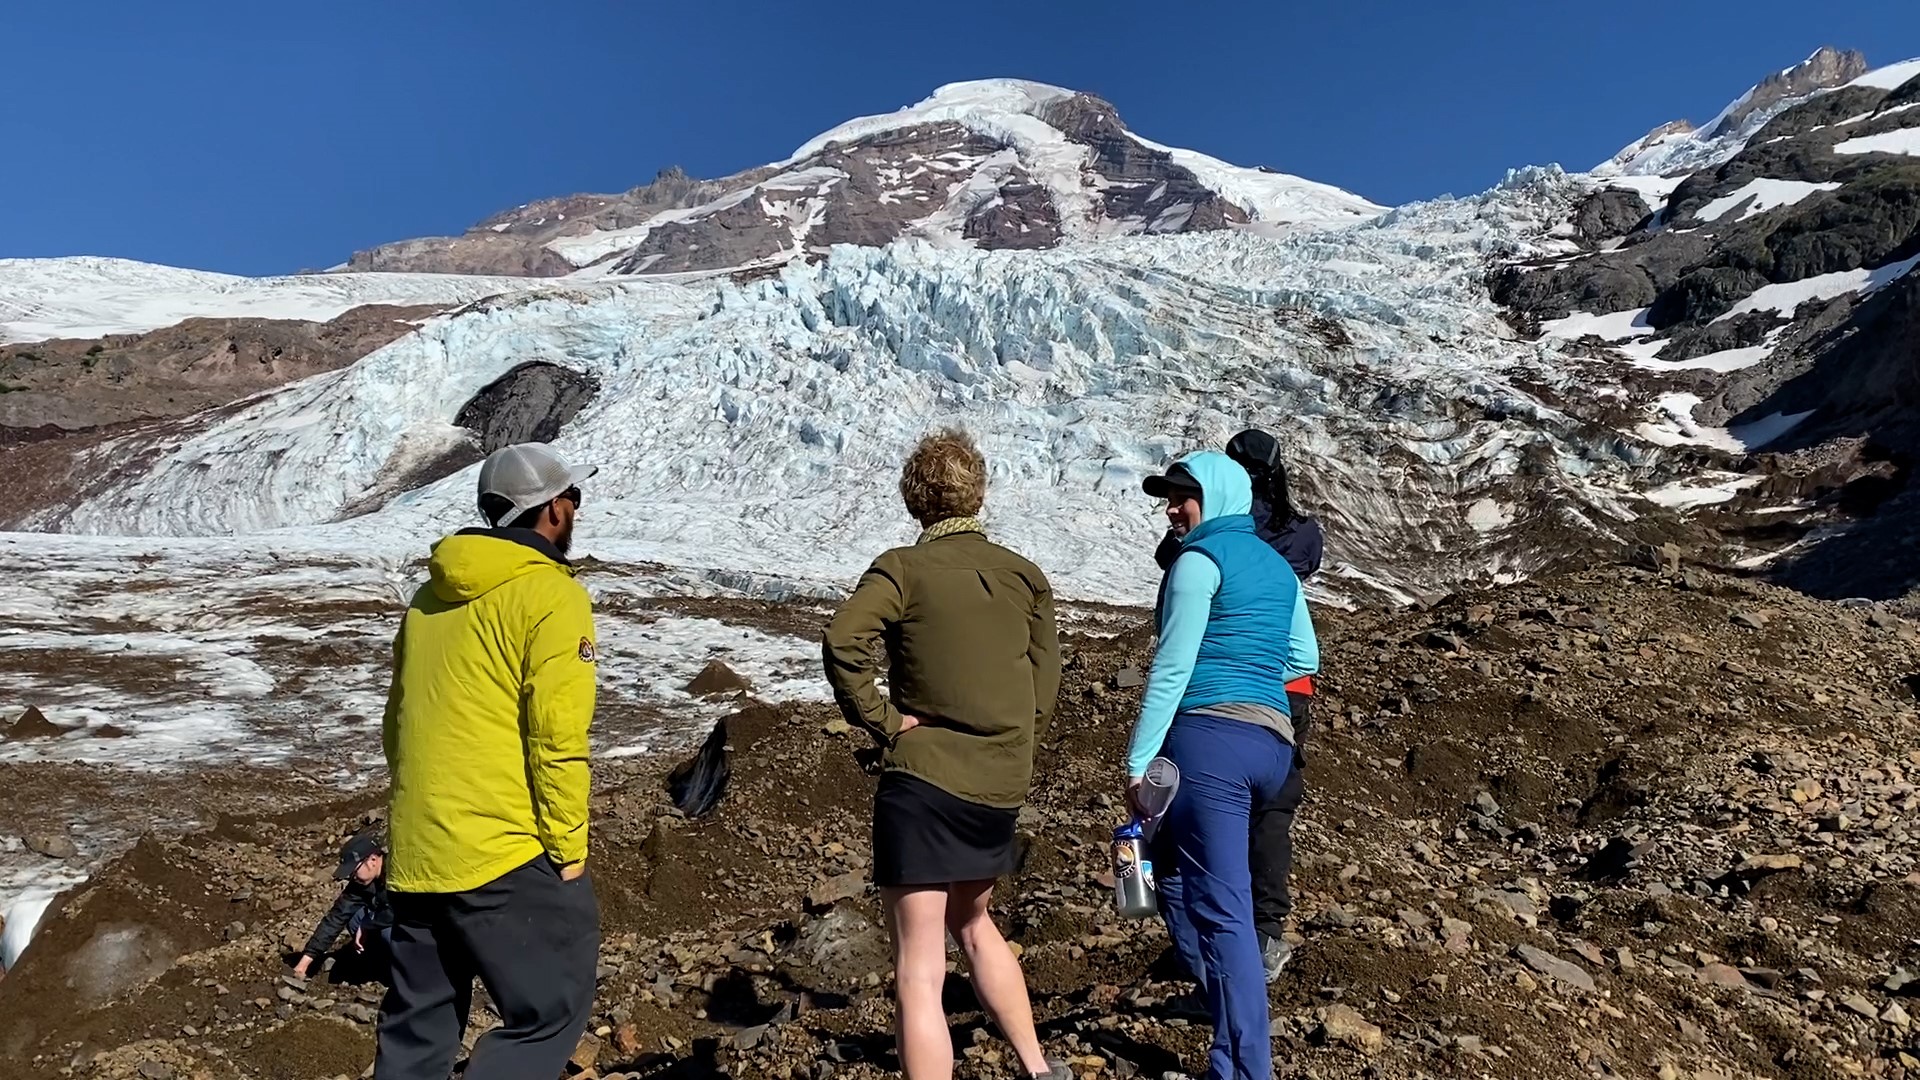 Mountain Madness Cascade Glacier Walking Tours invite you to see glaciers up close while learning about the impacts of climate change. #k5evening